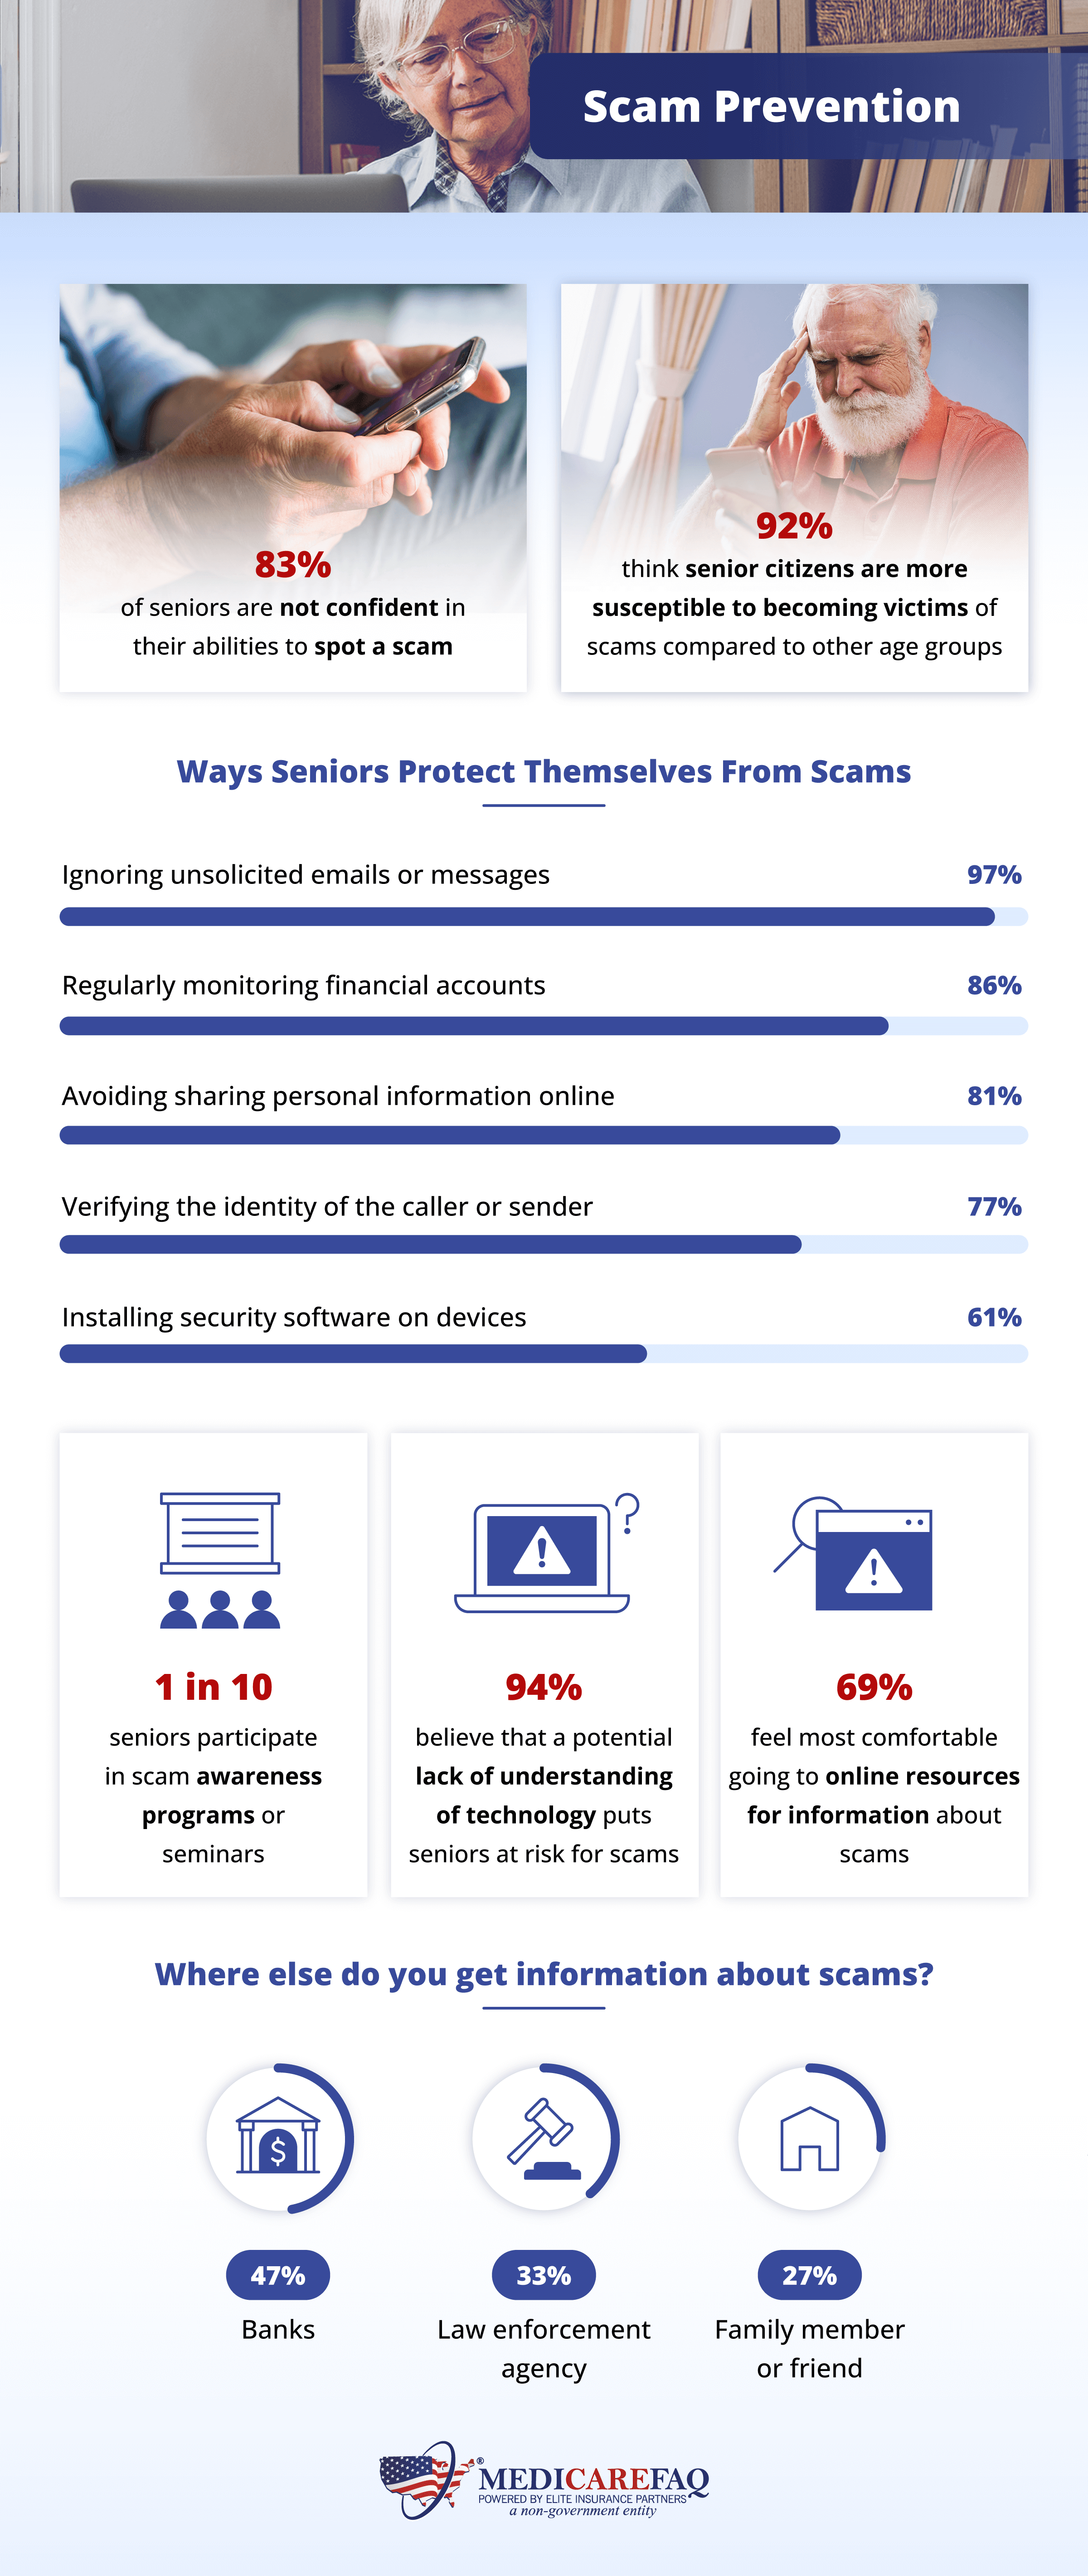 How comfortable senior citizens feel identifying scams and ways they can prevent becoming a victim - study from MedicareFAQ.com